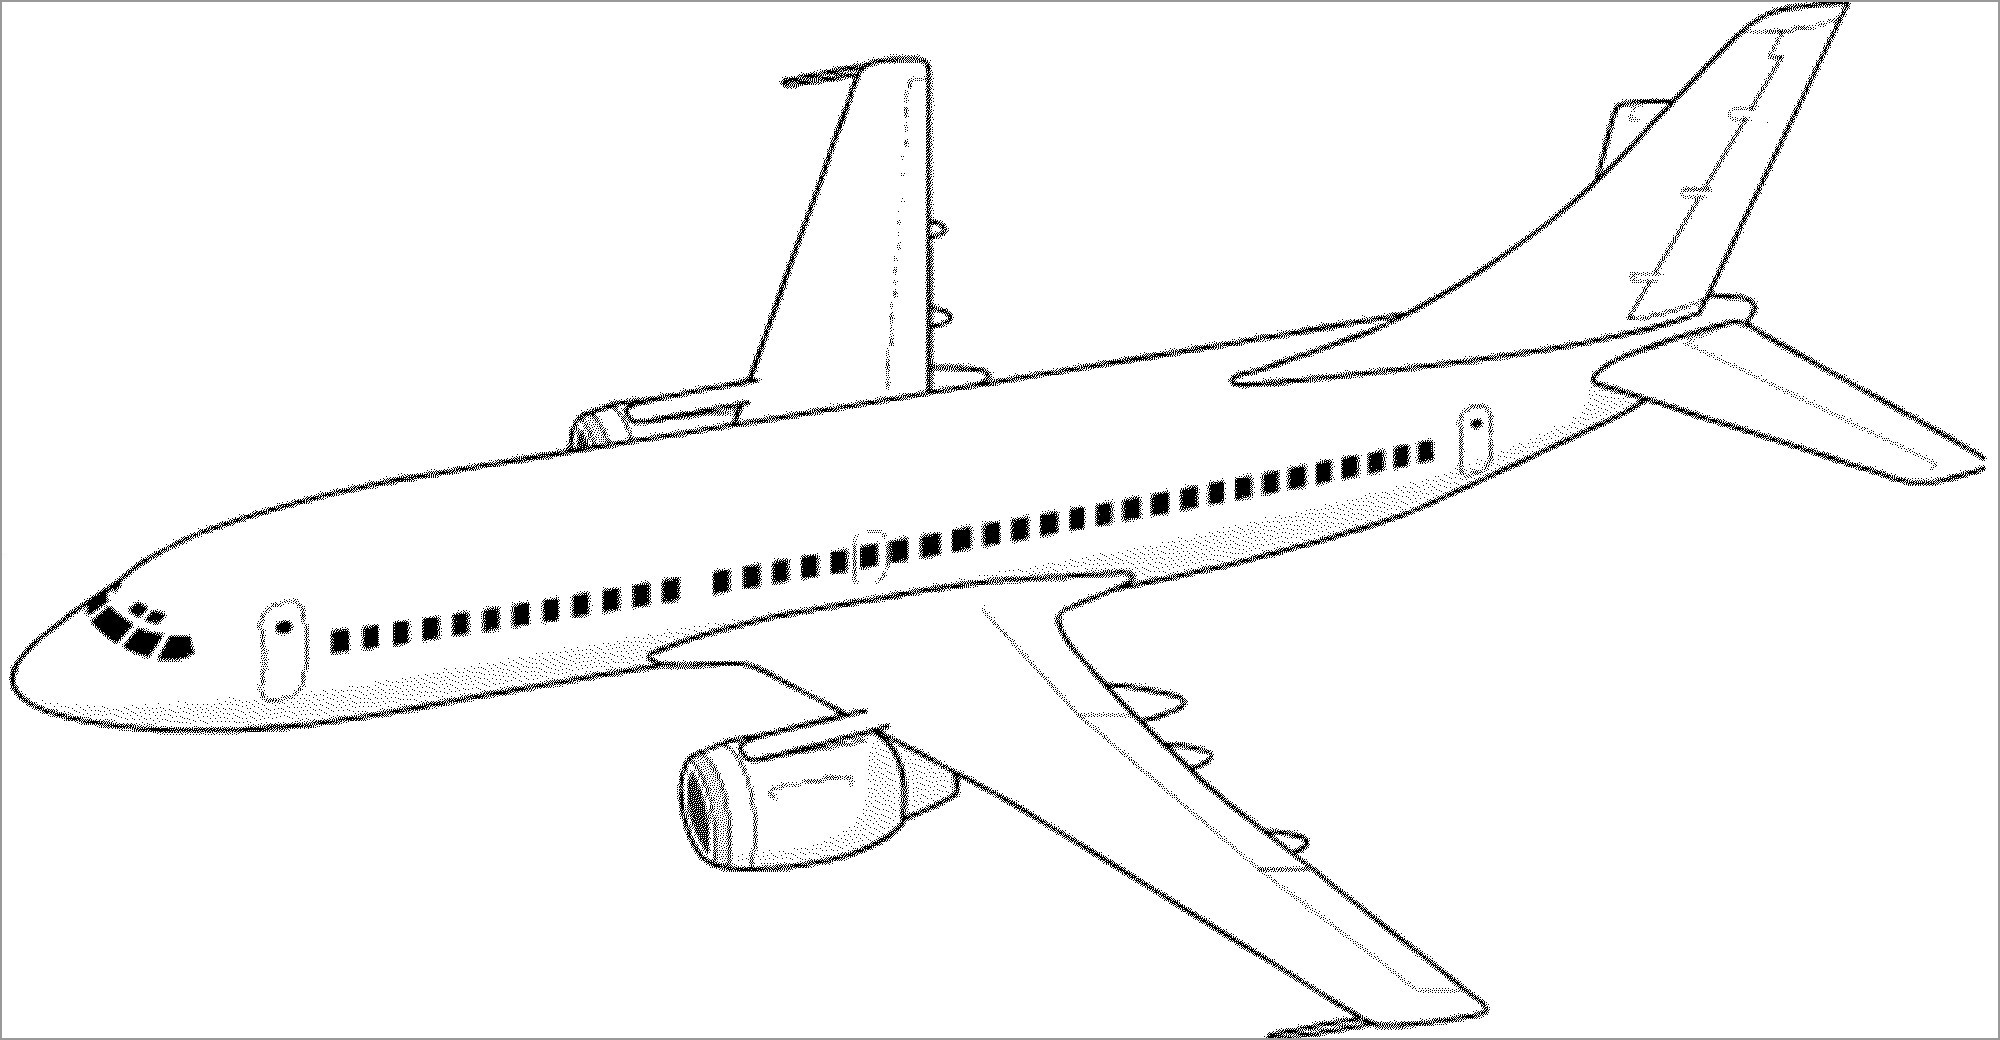 coloring page airplanes